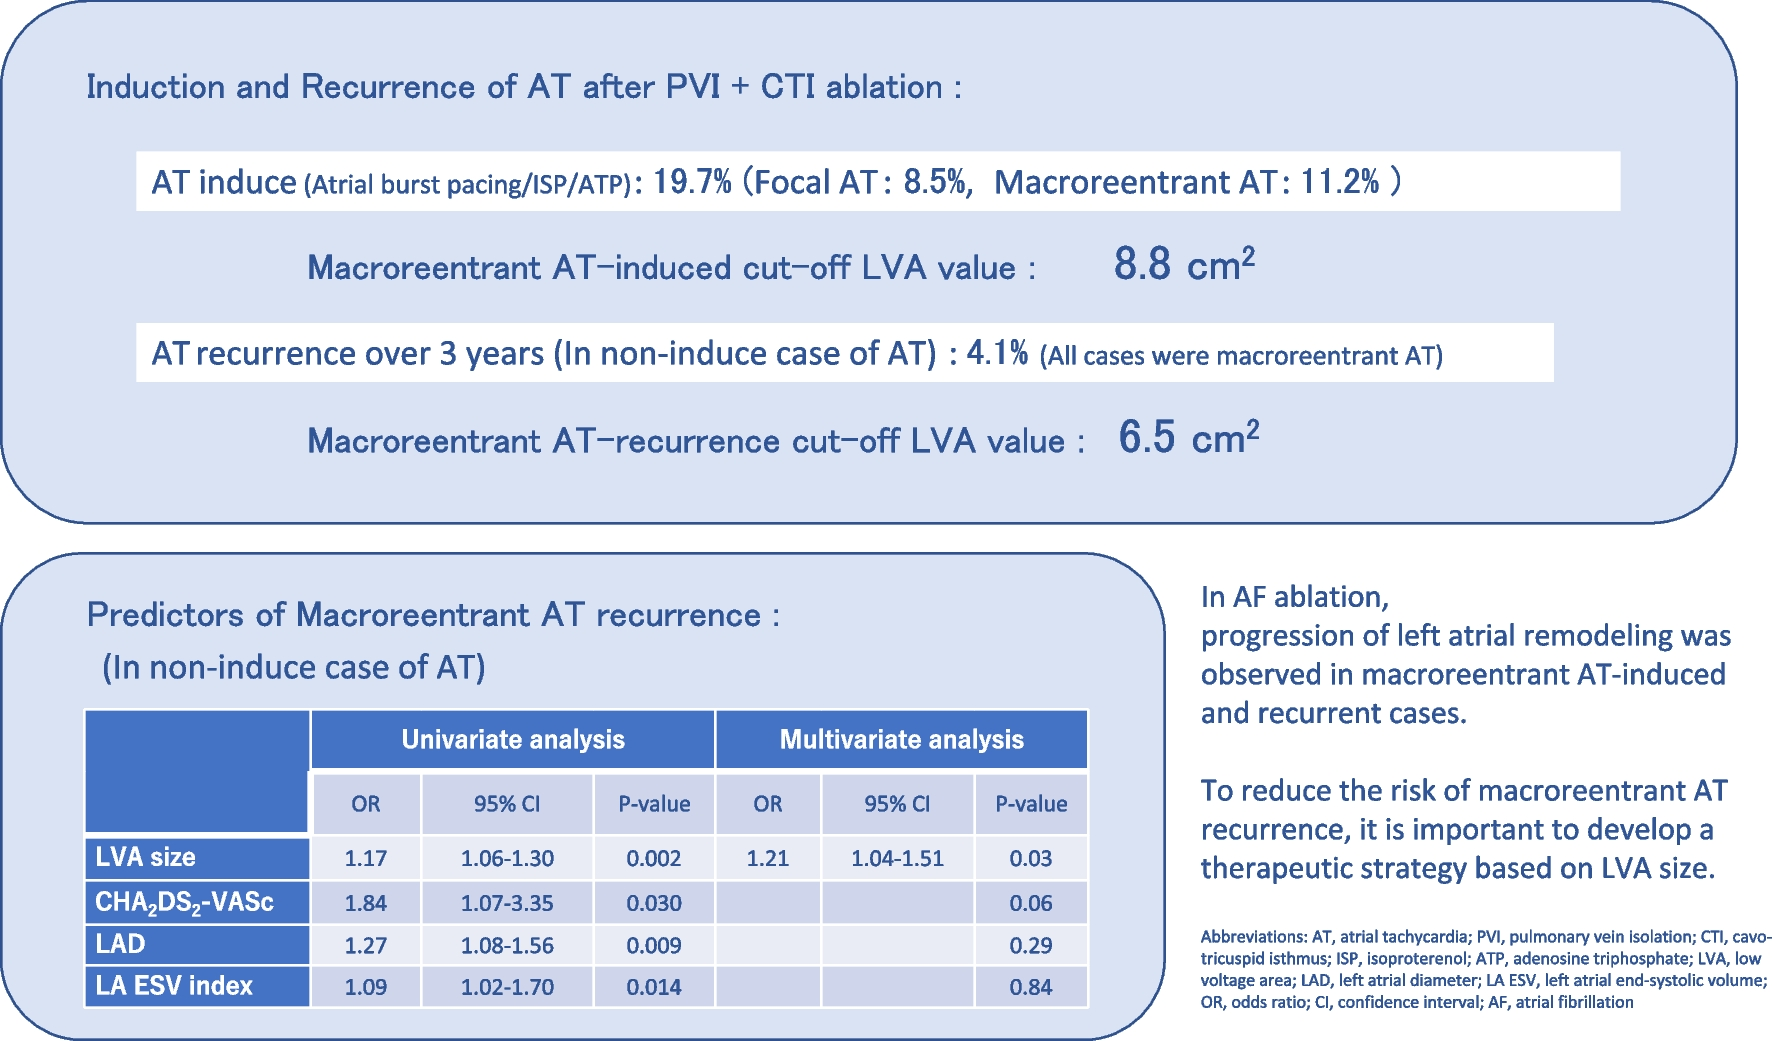 Association between left atrial low-voltage area and induction and recurrence of macroreentrant atrial tachycardia in pulmonary vein isolation for atrial fibrillation